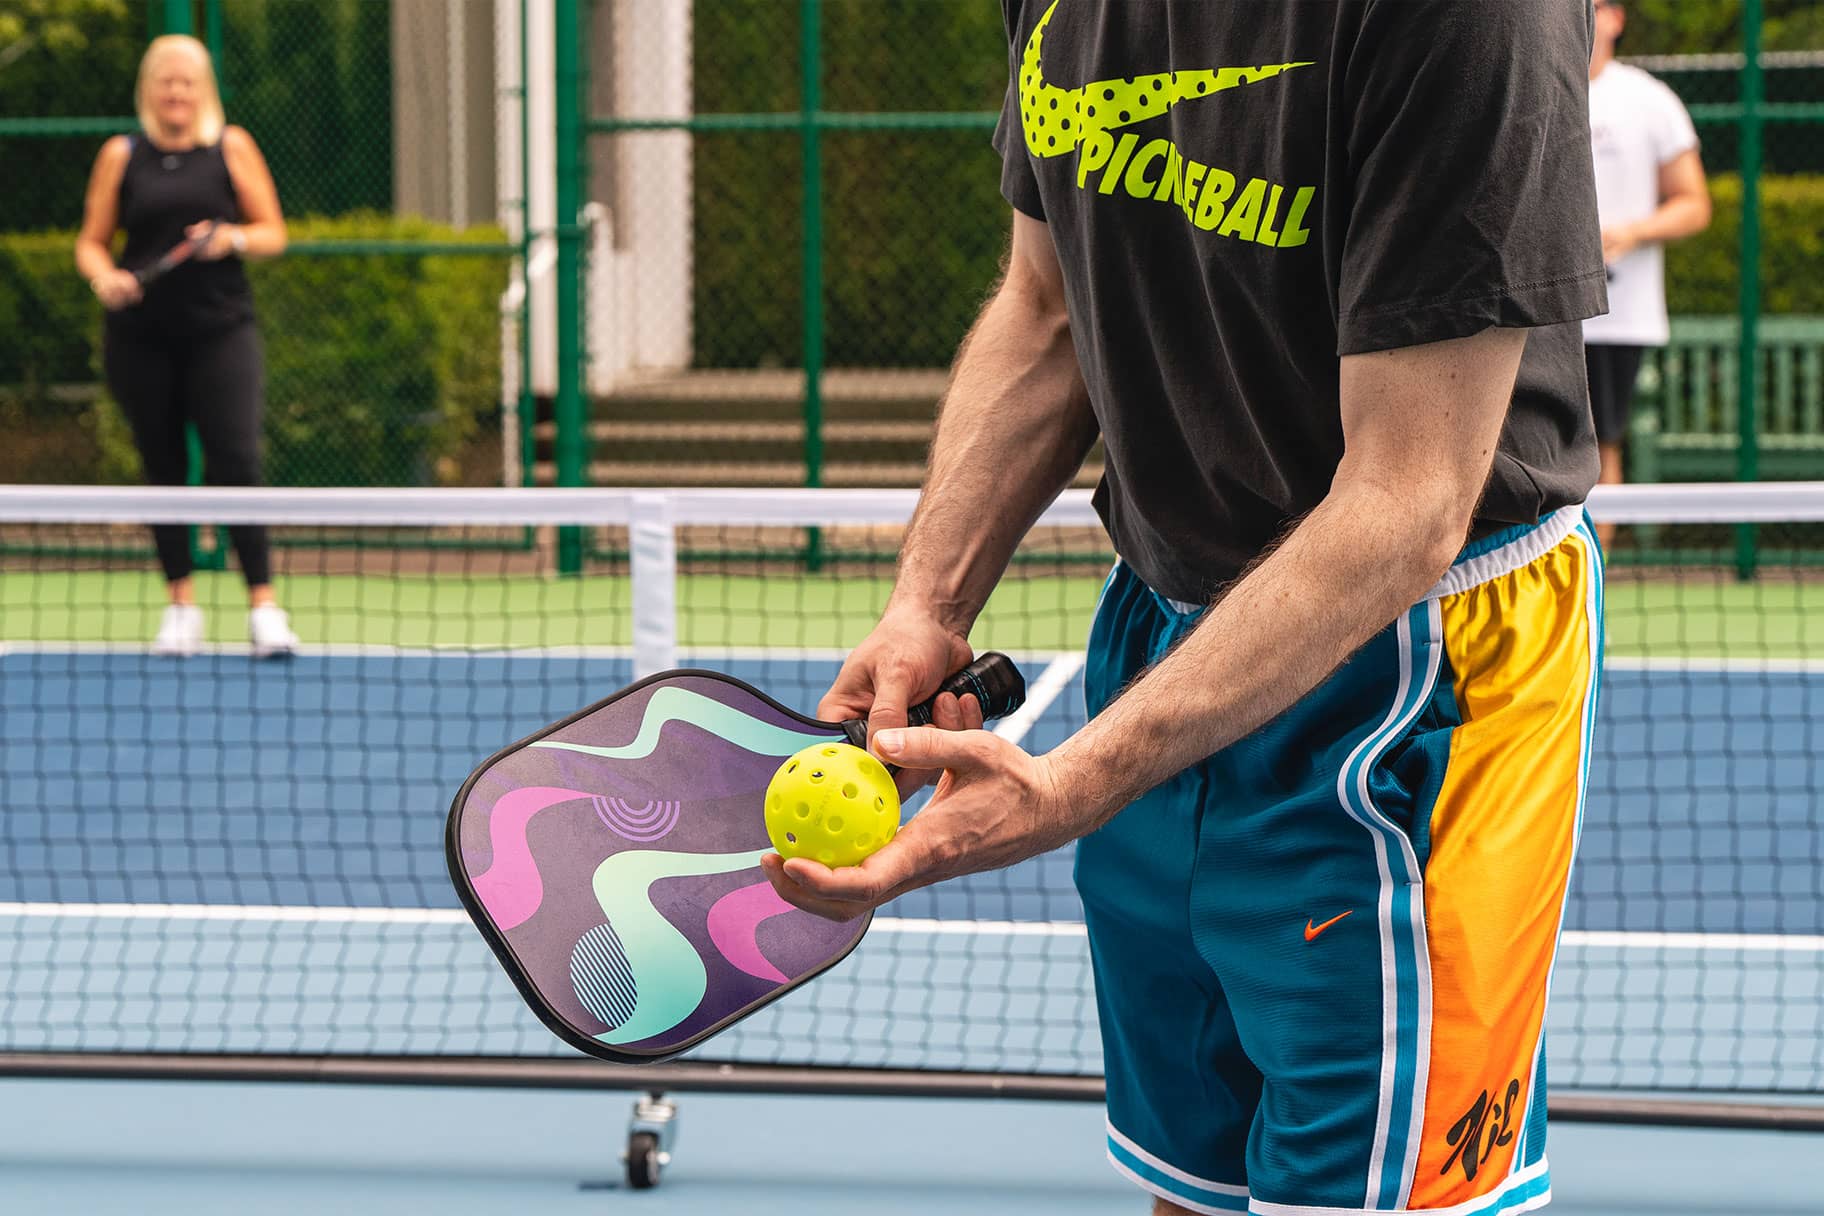 What Is Pickleball? And How Do You Play It?